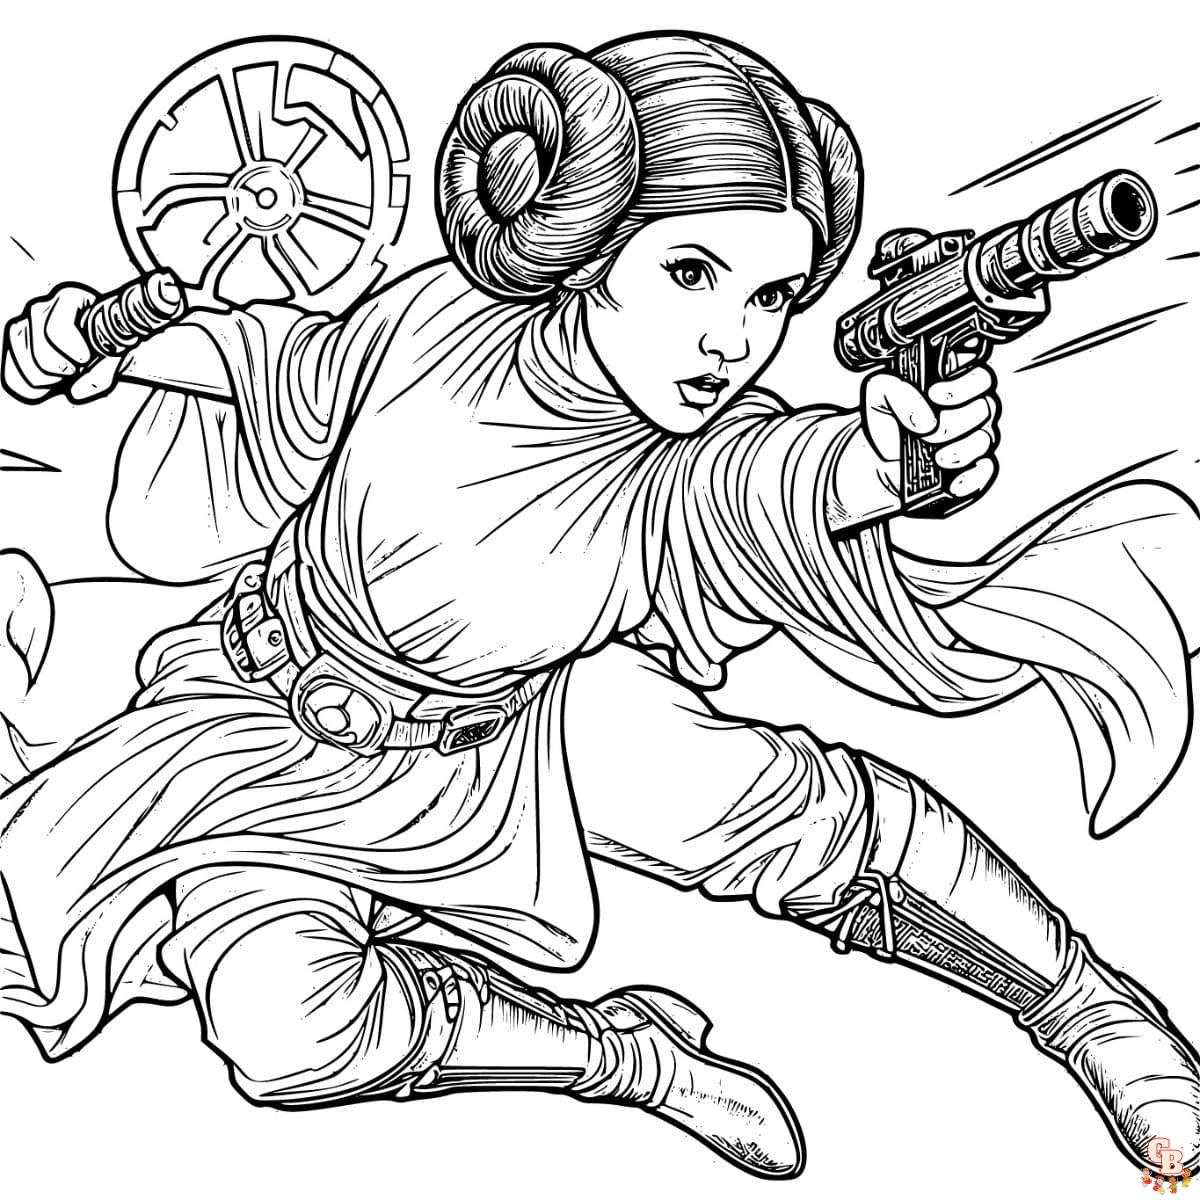 Star Wars Coloring Pages